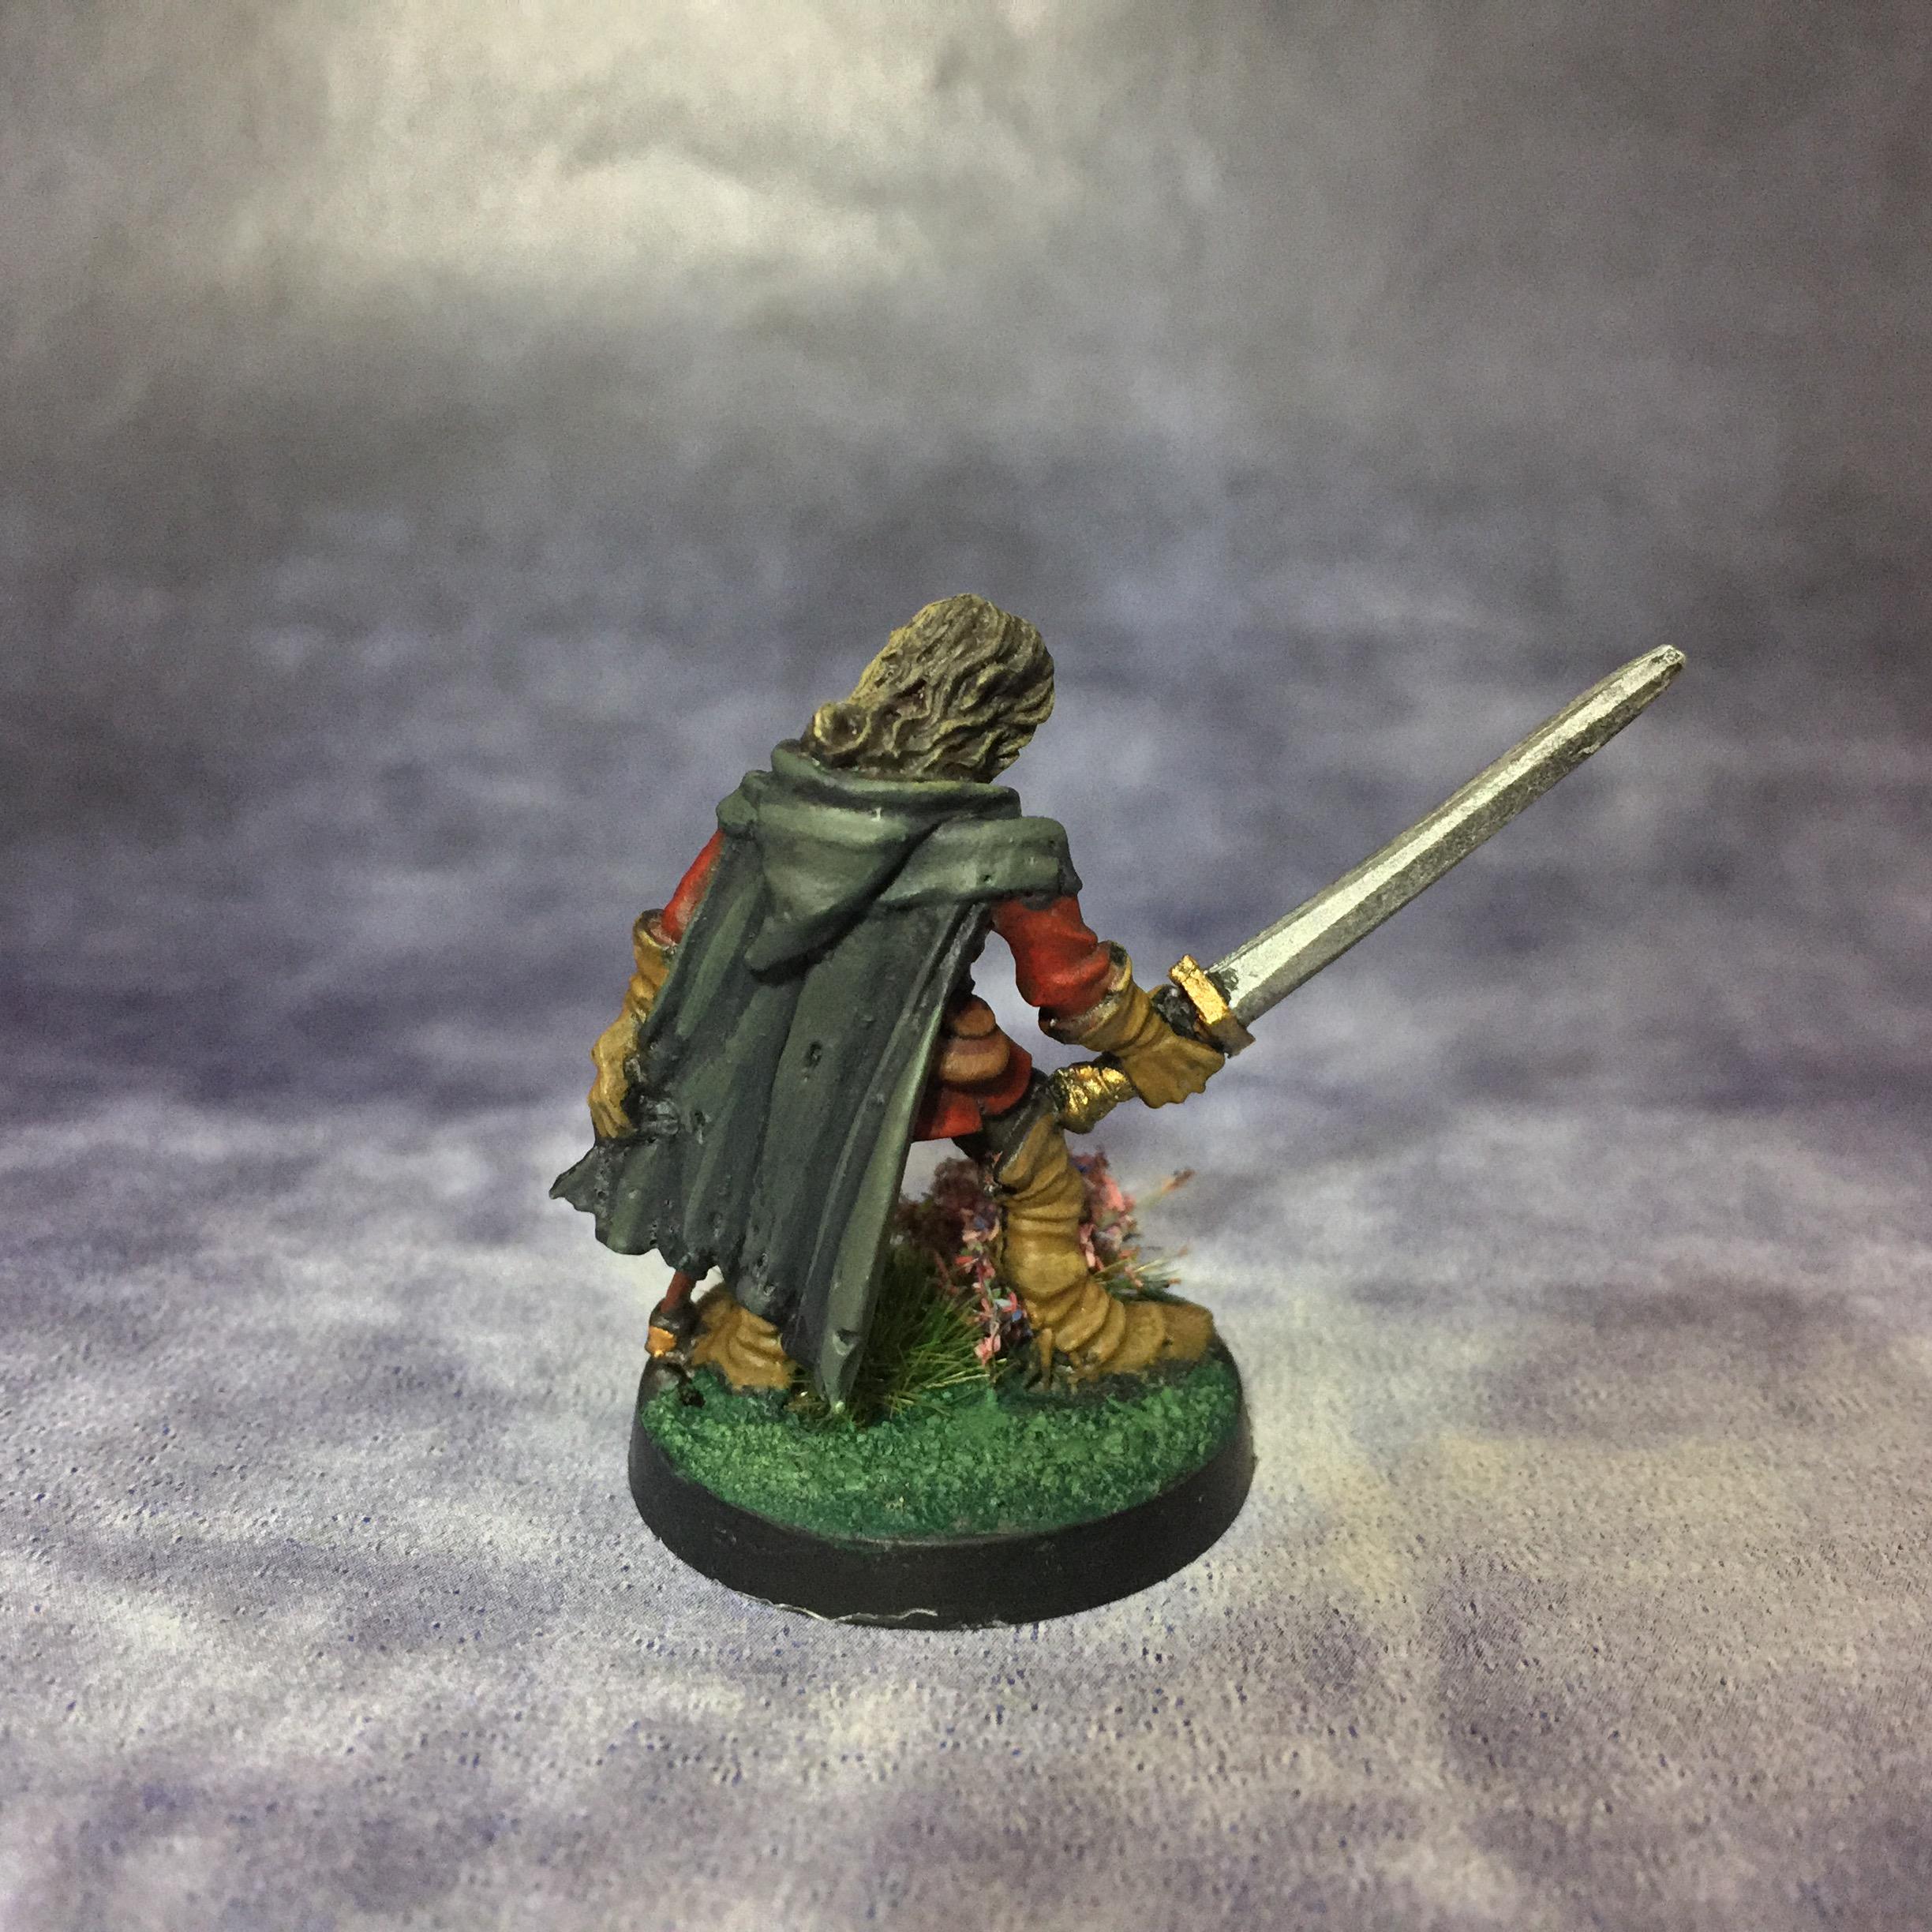 Aragorn, Citadel, Elves, Games Workshop, Jes Goodwin, Lord Of The Rings, May 2018, Oldhammer